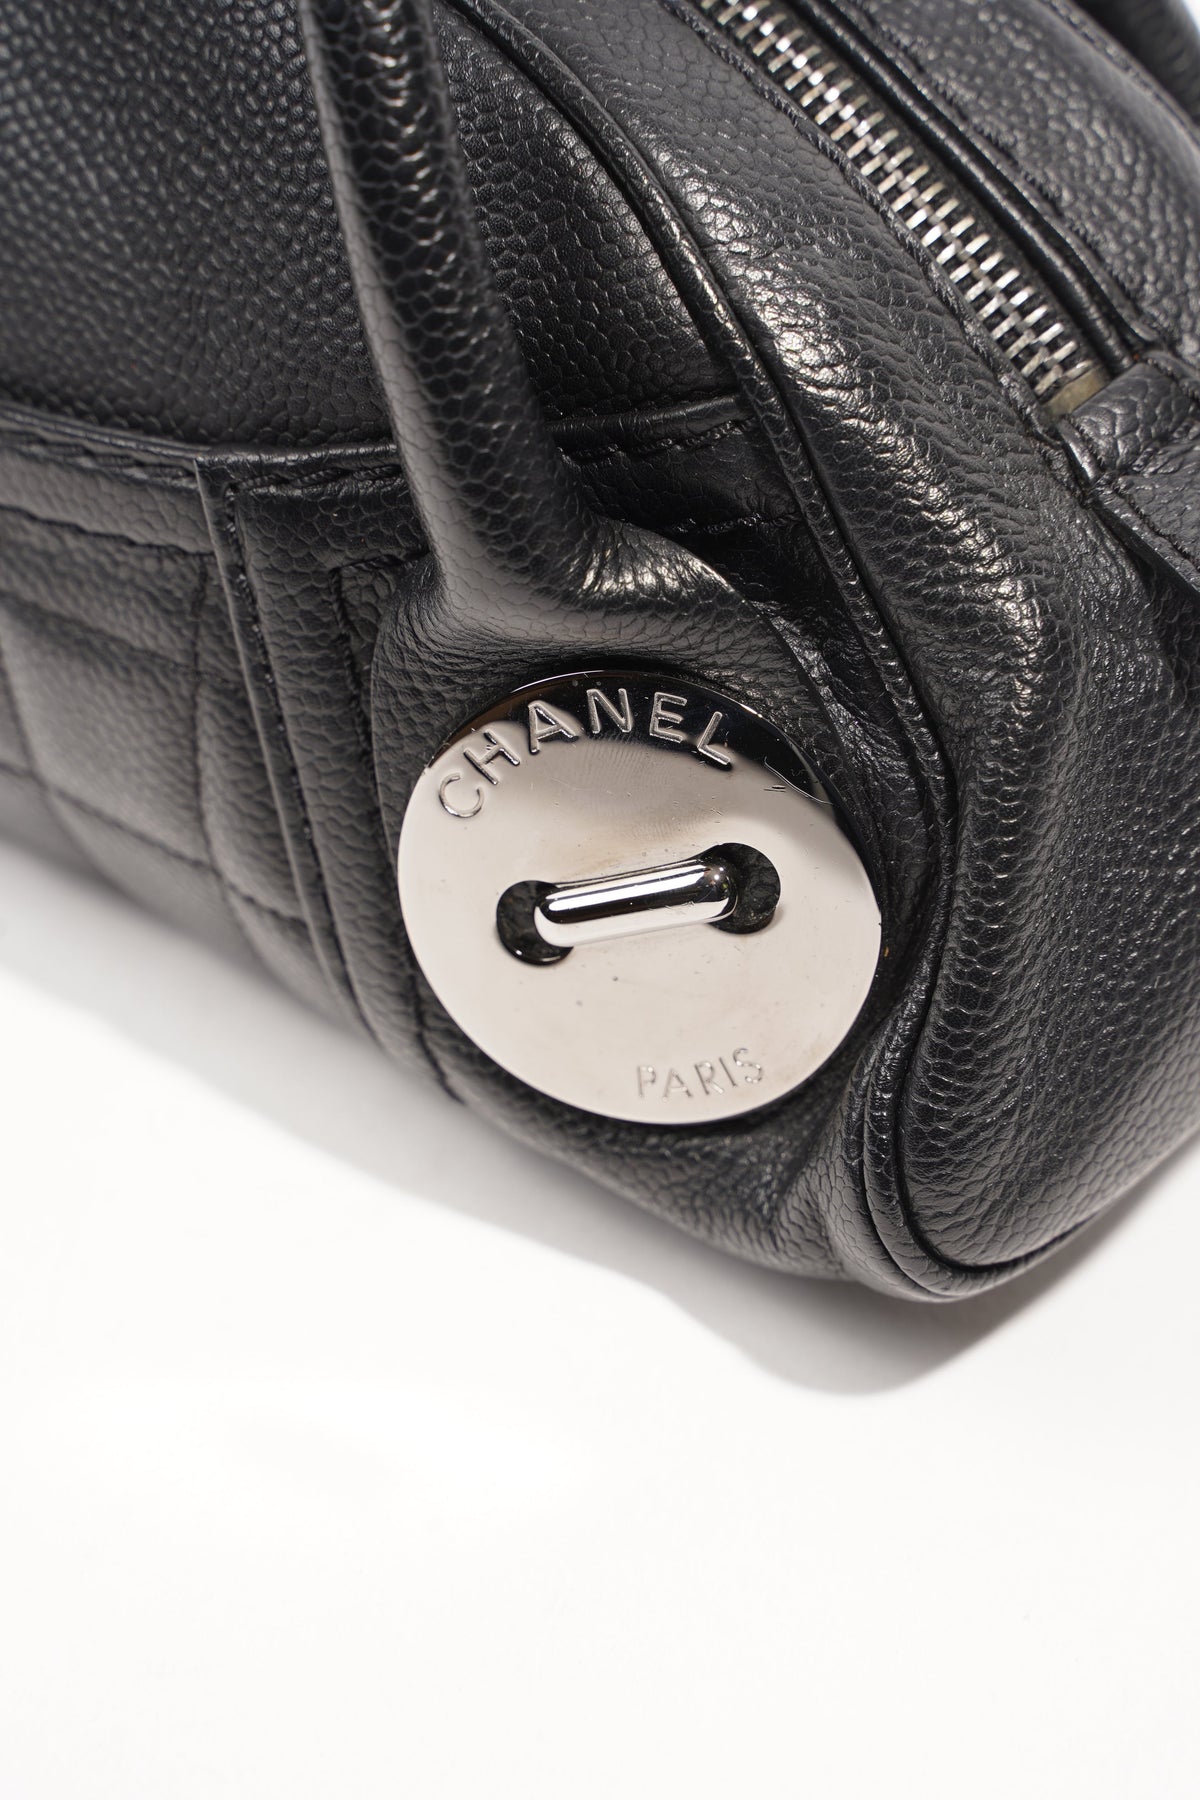 Sold at Auction: A Pink Chanel Mini Bowling Bag Chanel